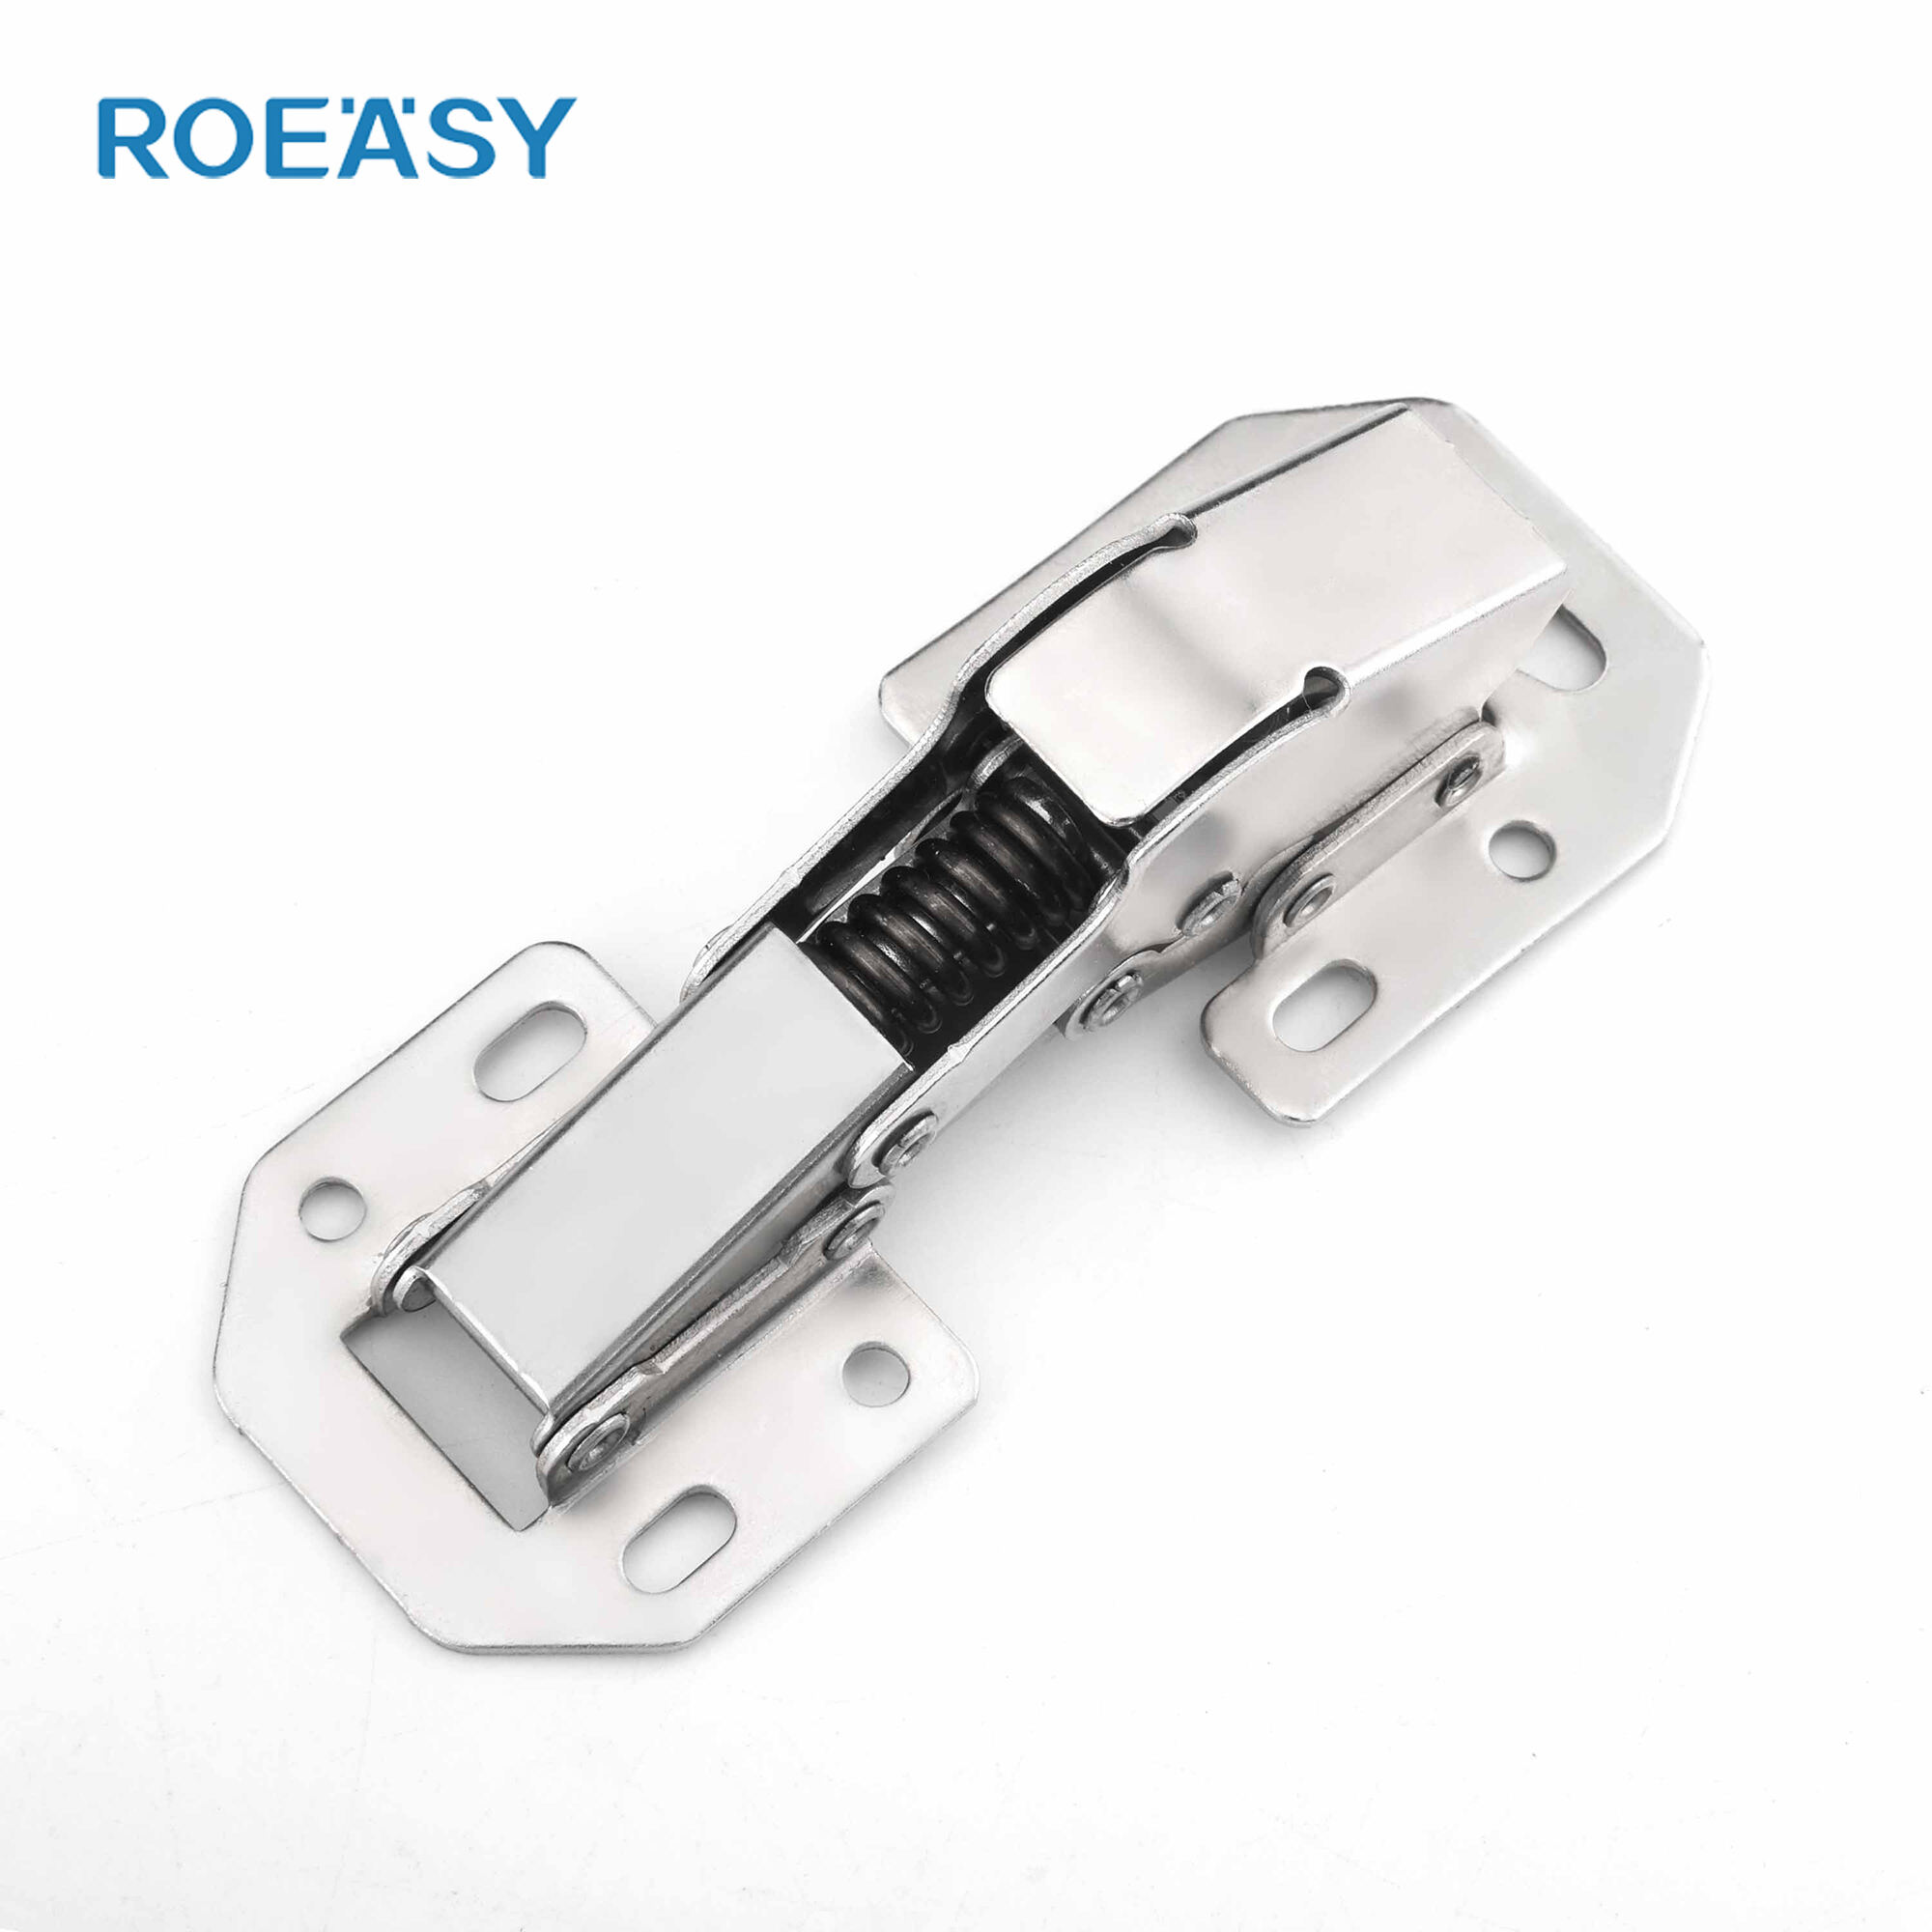 Roeasy FH-002S Screw-in Type 4 inch 90 degree frog shaped spring cabinet hinge